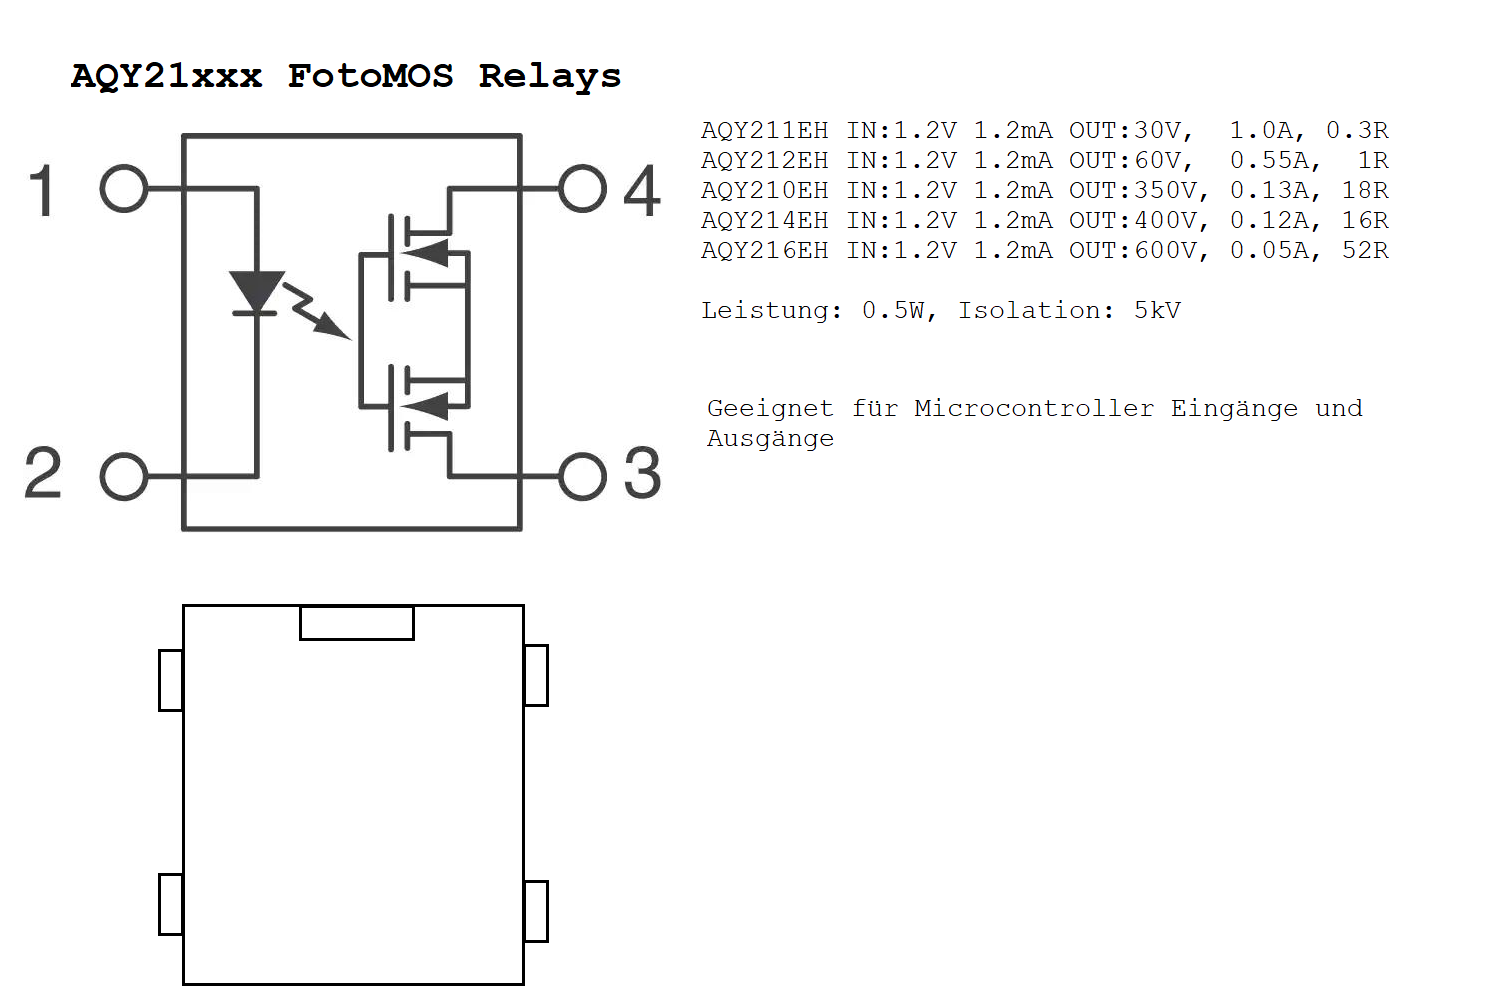 Optokoppler AQY212EH FotoMOS Relay DIL4 IN:1.2V 1.2mA OUT:60V 0.55A 0.8R